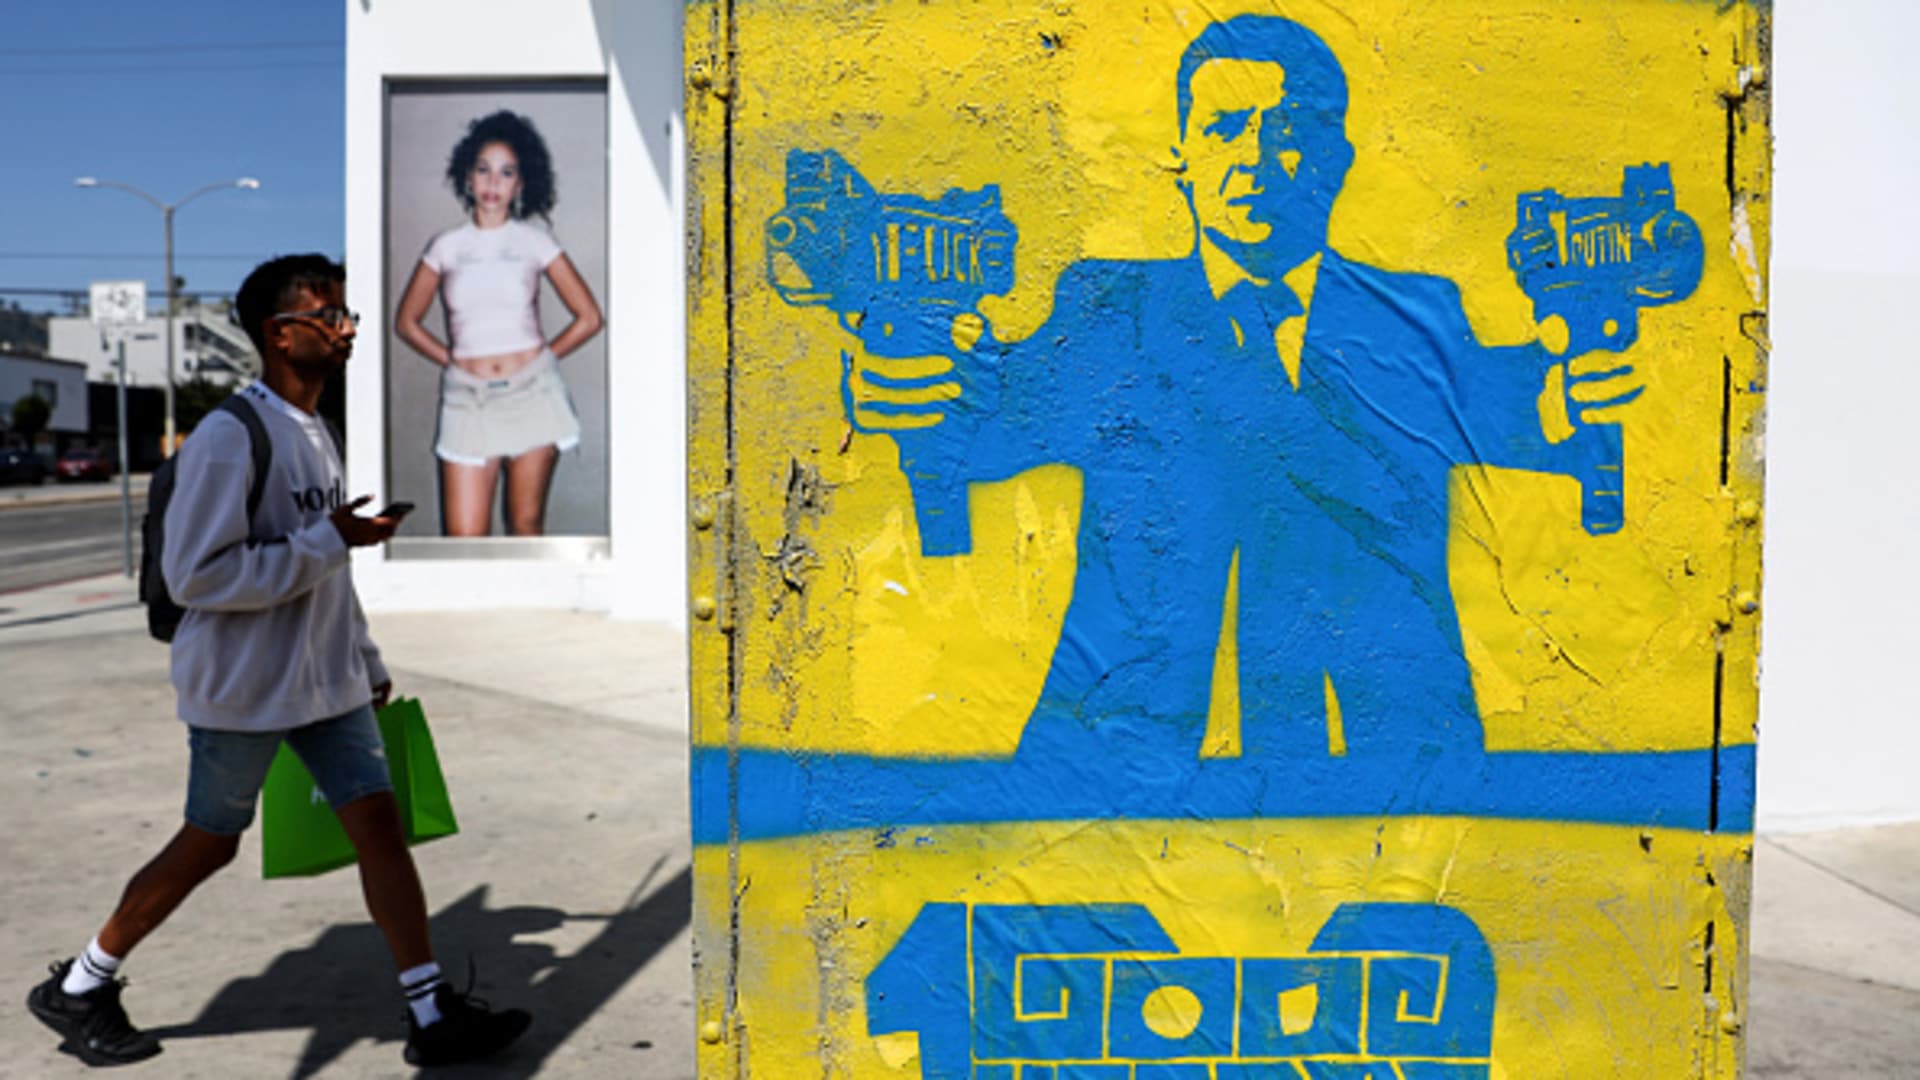 A street stencil by artist 1GoodHombre depicts Ukrainian President Volodymyr Zelenskyy gripping submachine guns as a person walks past on Melrose Avenue on March 30, 2022 in Los Angeles, California.